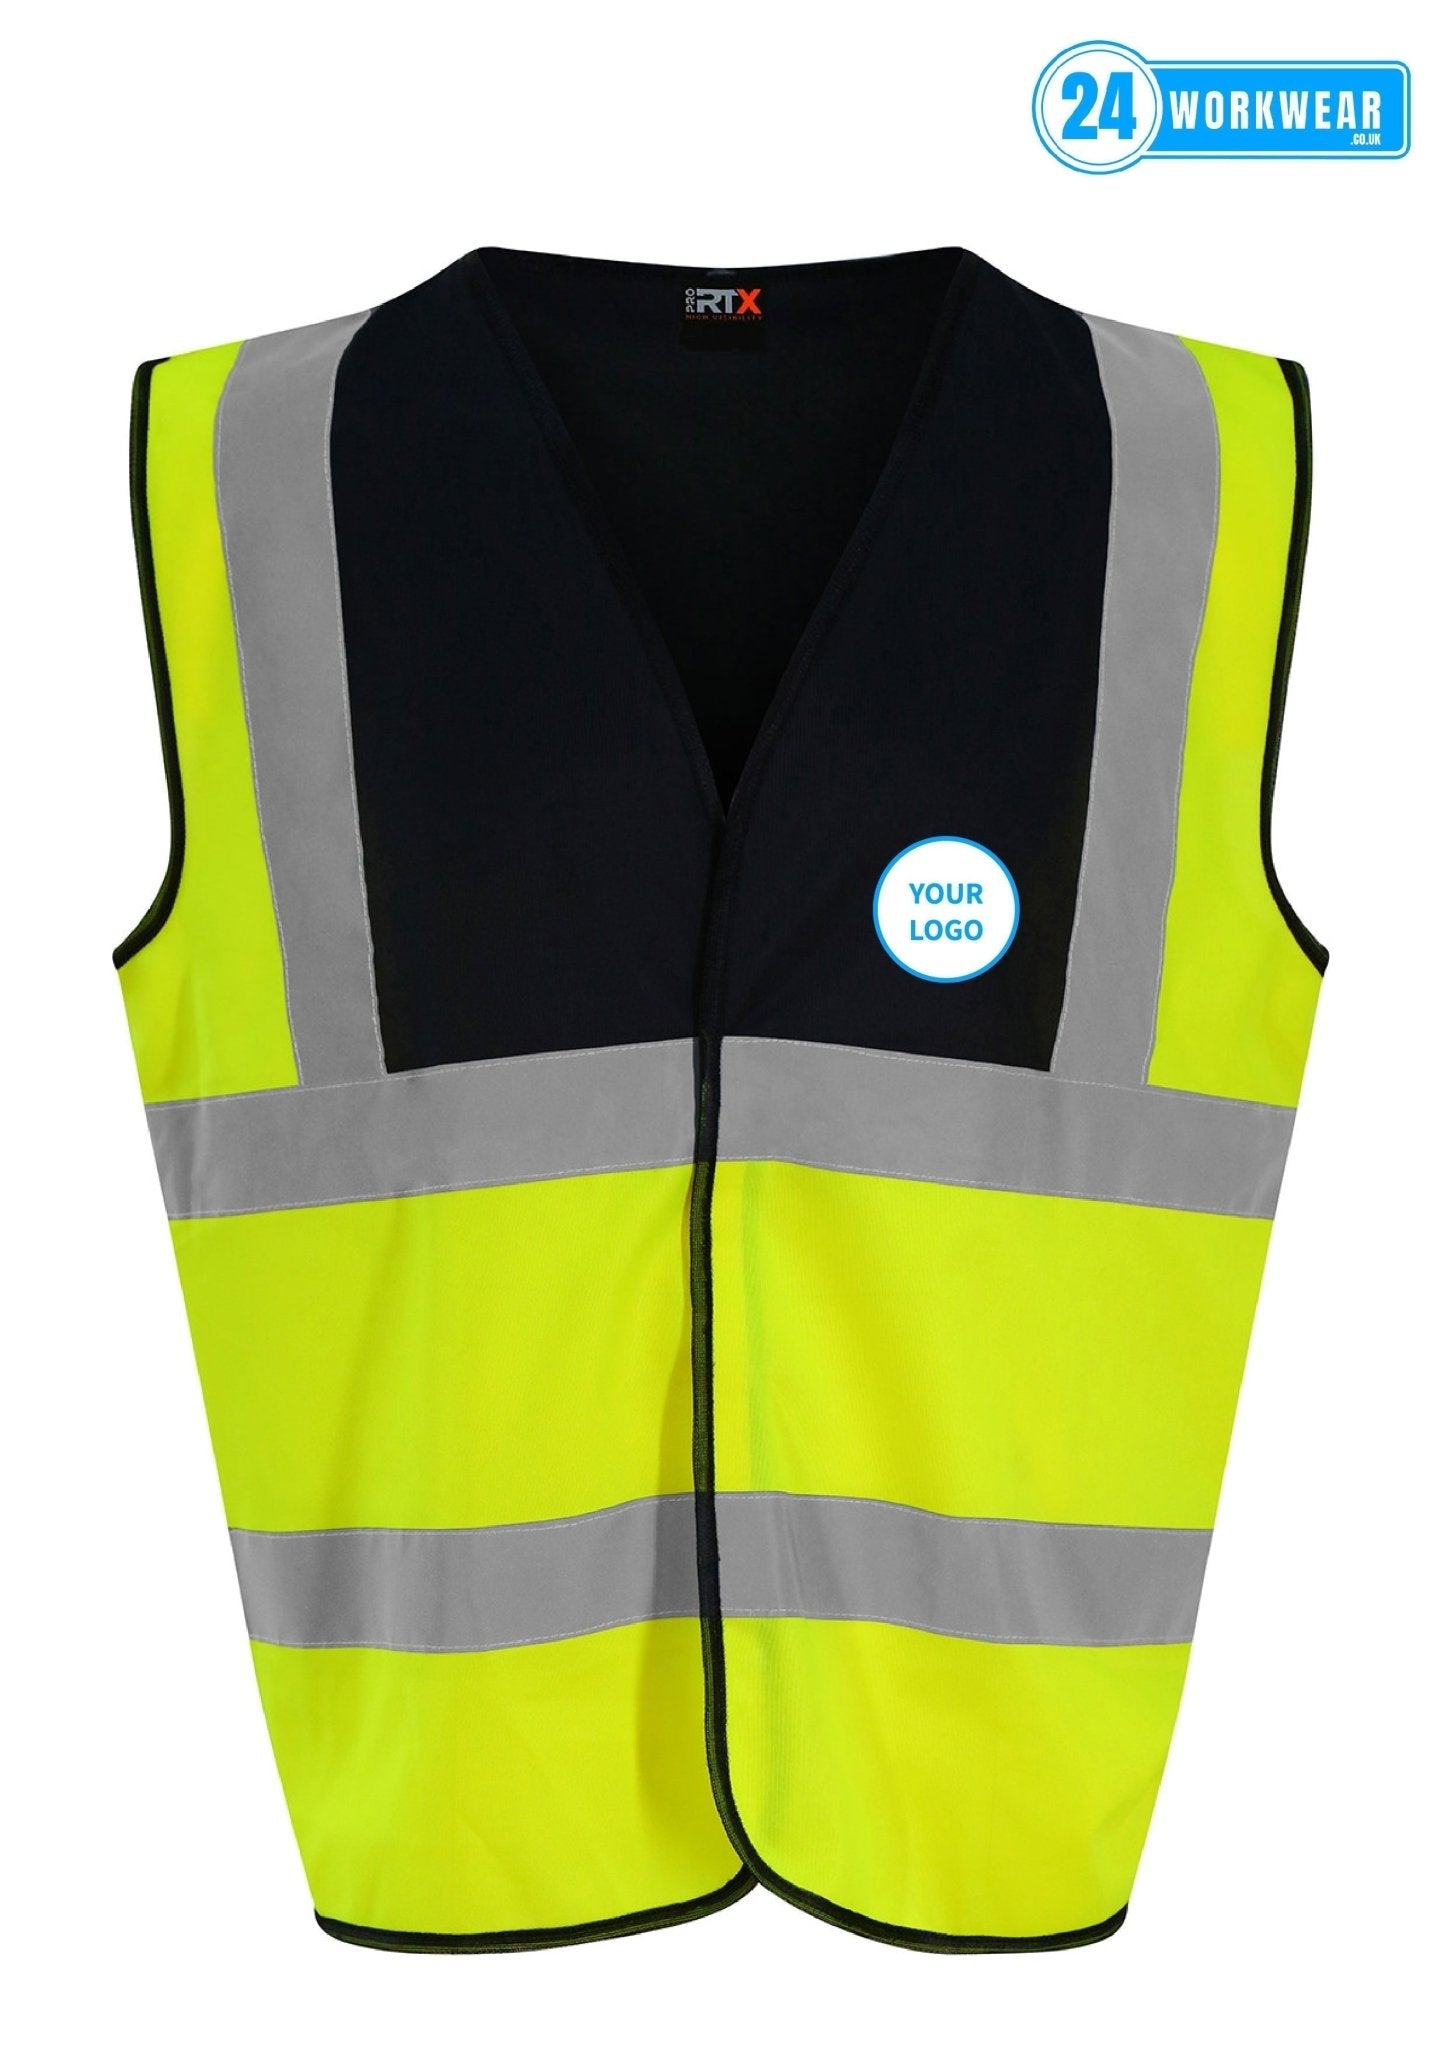 20 x High Visibility Waistcoat Deal - 24 Workwear - High Visibility